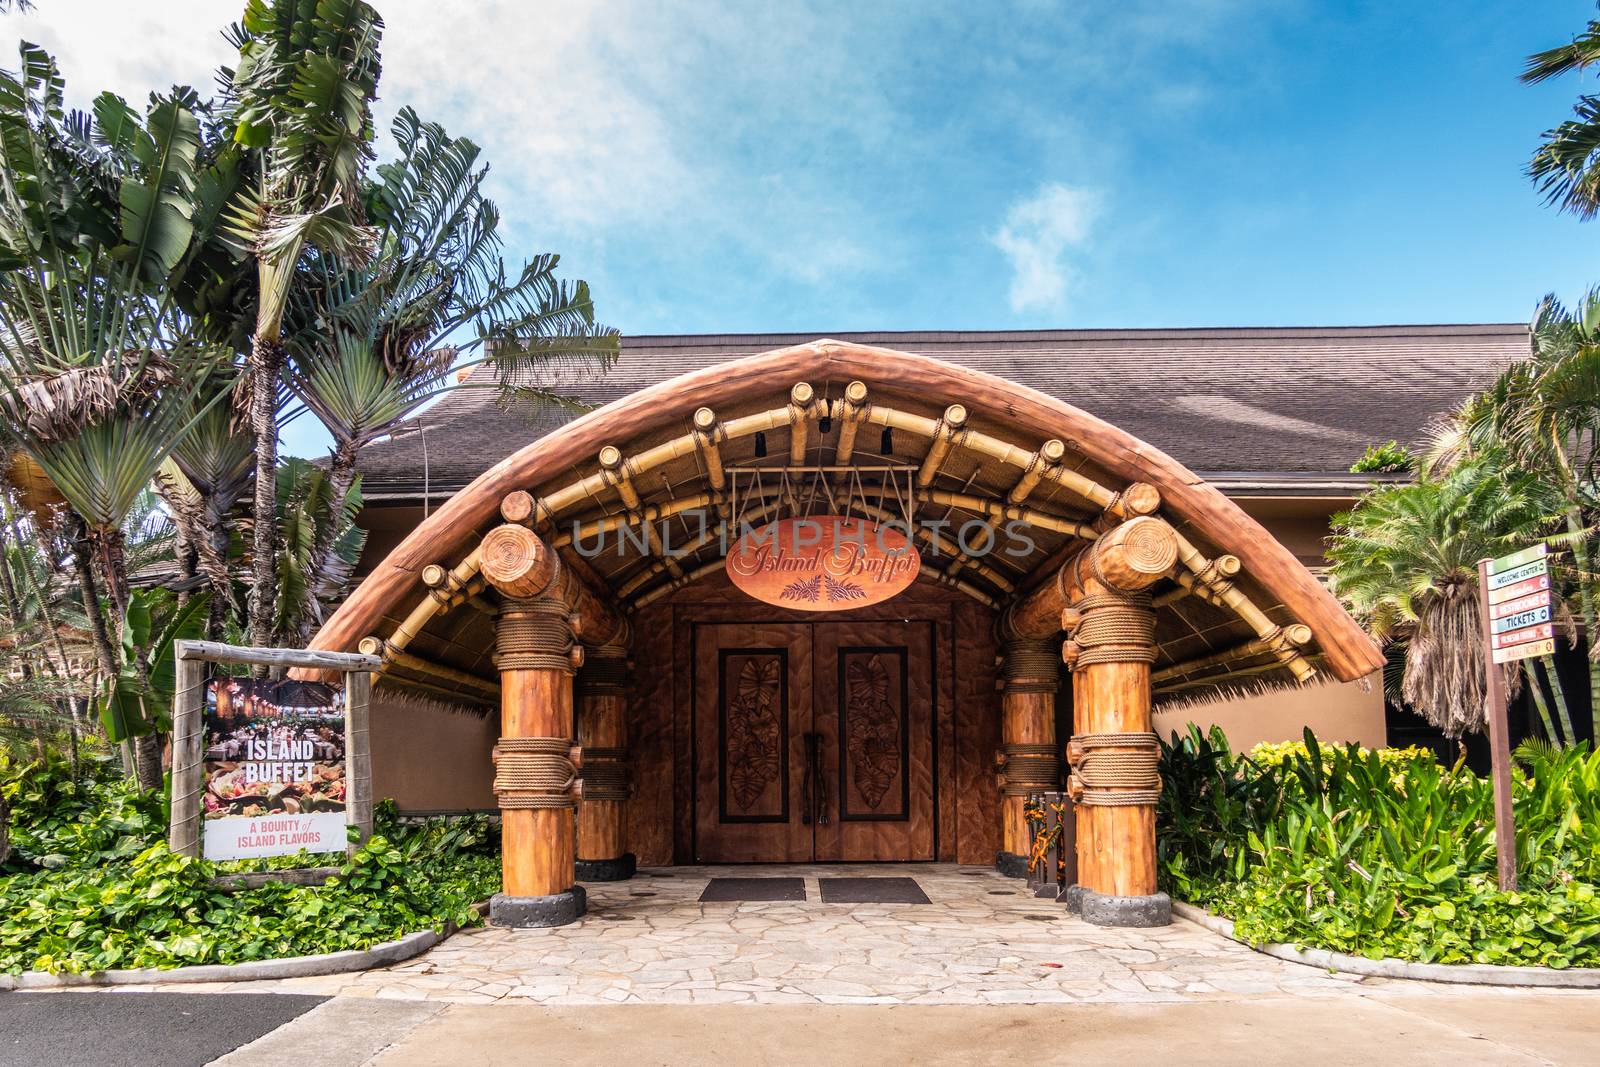 Island buffet building at Polynesian Cultural Center in Laie, Oa by Claudine